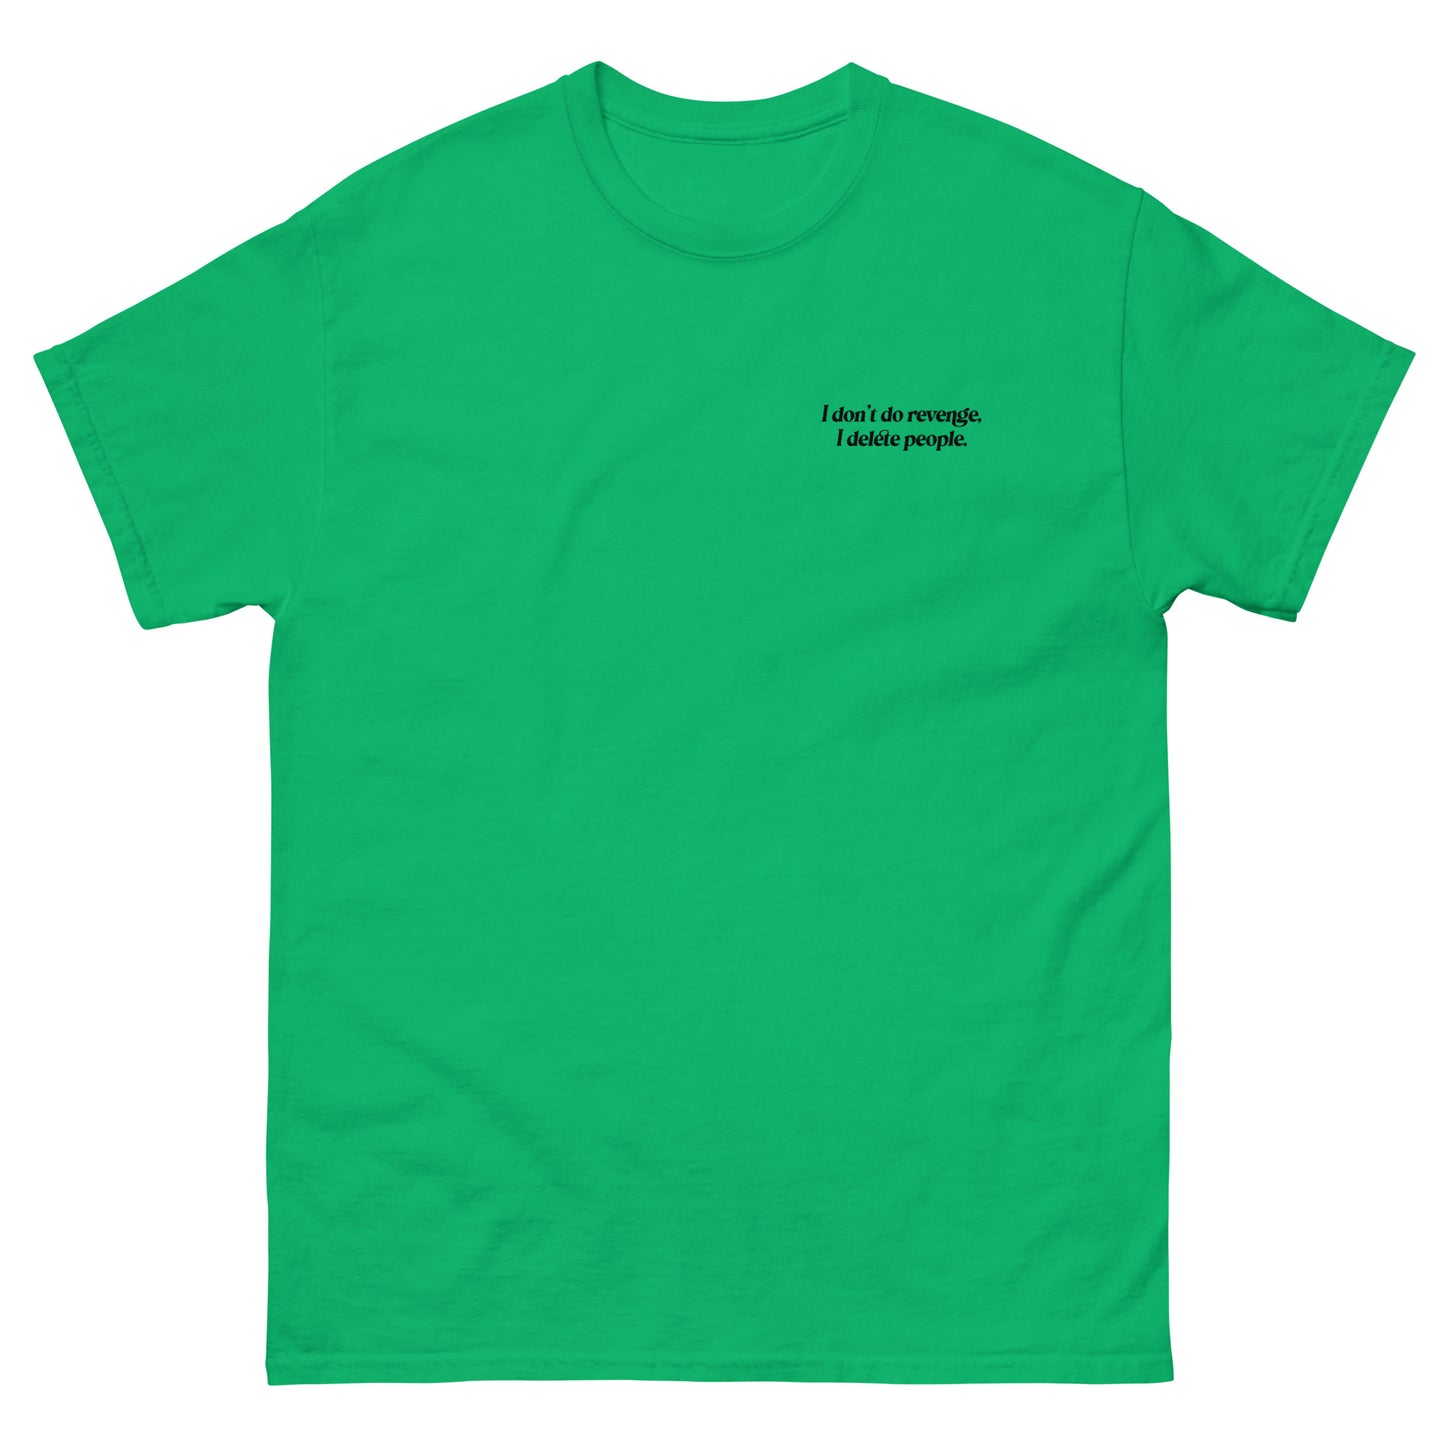 Green High Quality Tee - Front Design with "I don't do revenge, I delete people. " print on left chest - Back Design with a Phrase "I don't do revenge, I delete people." print